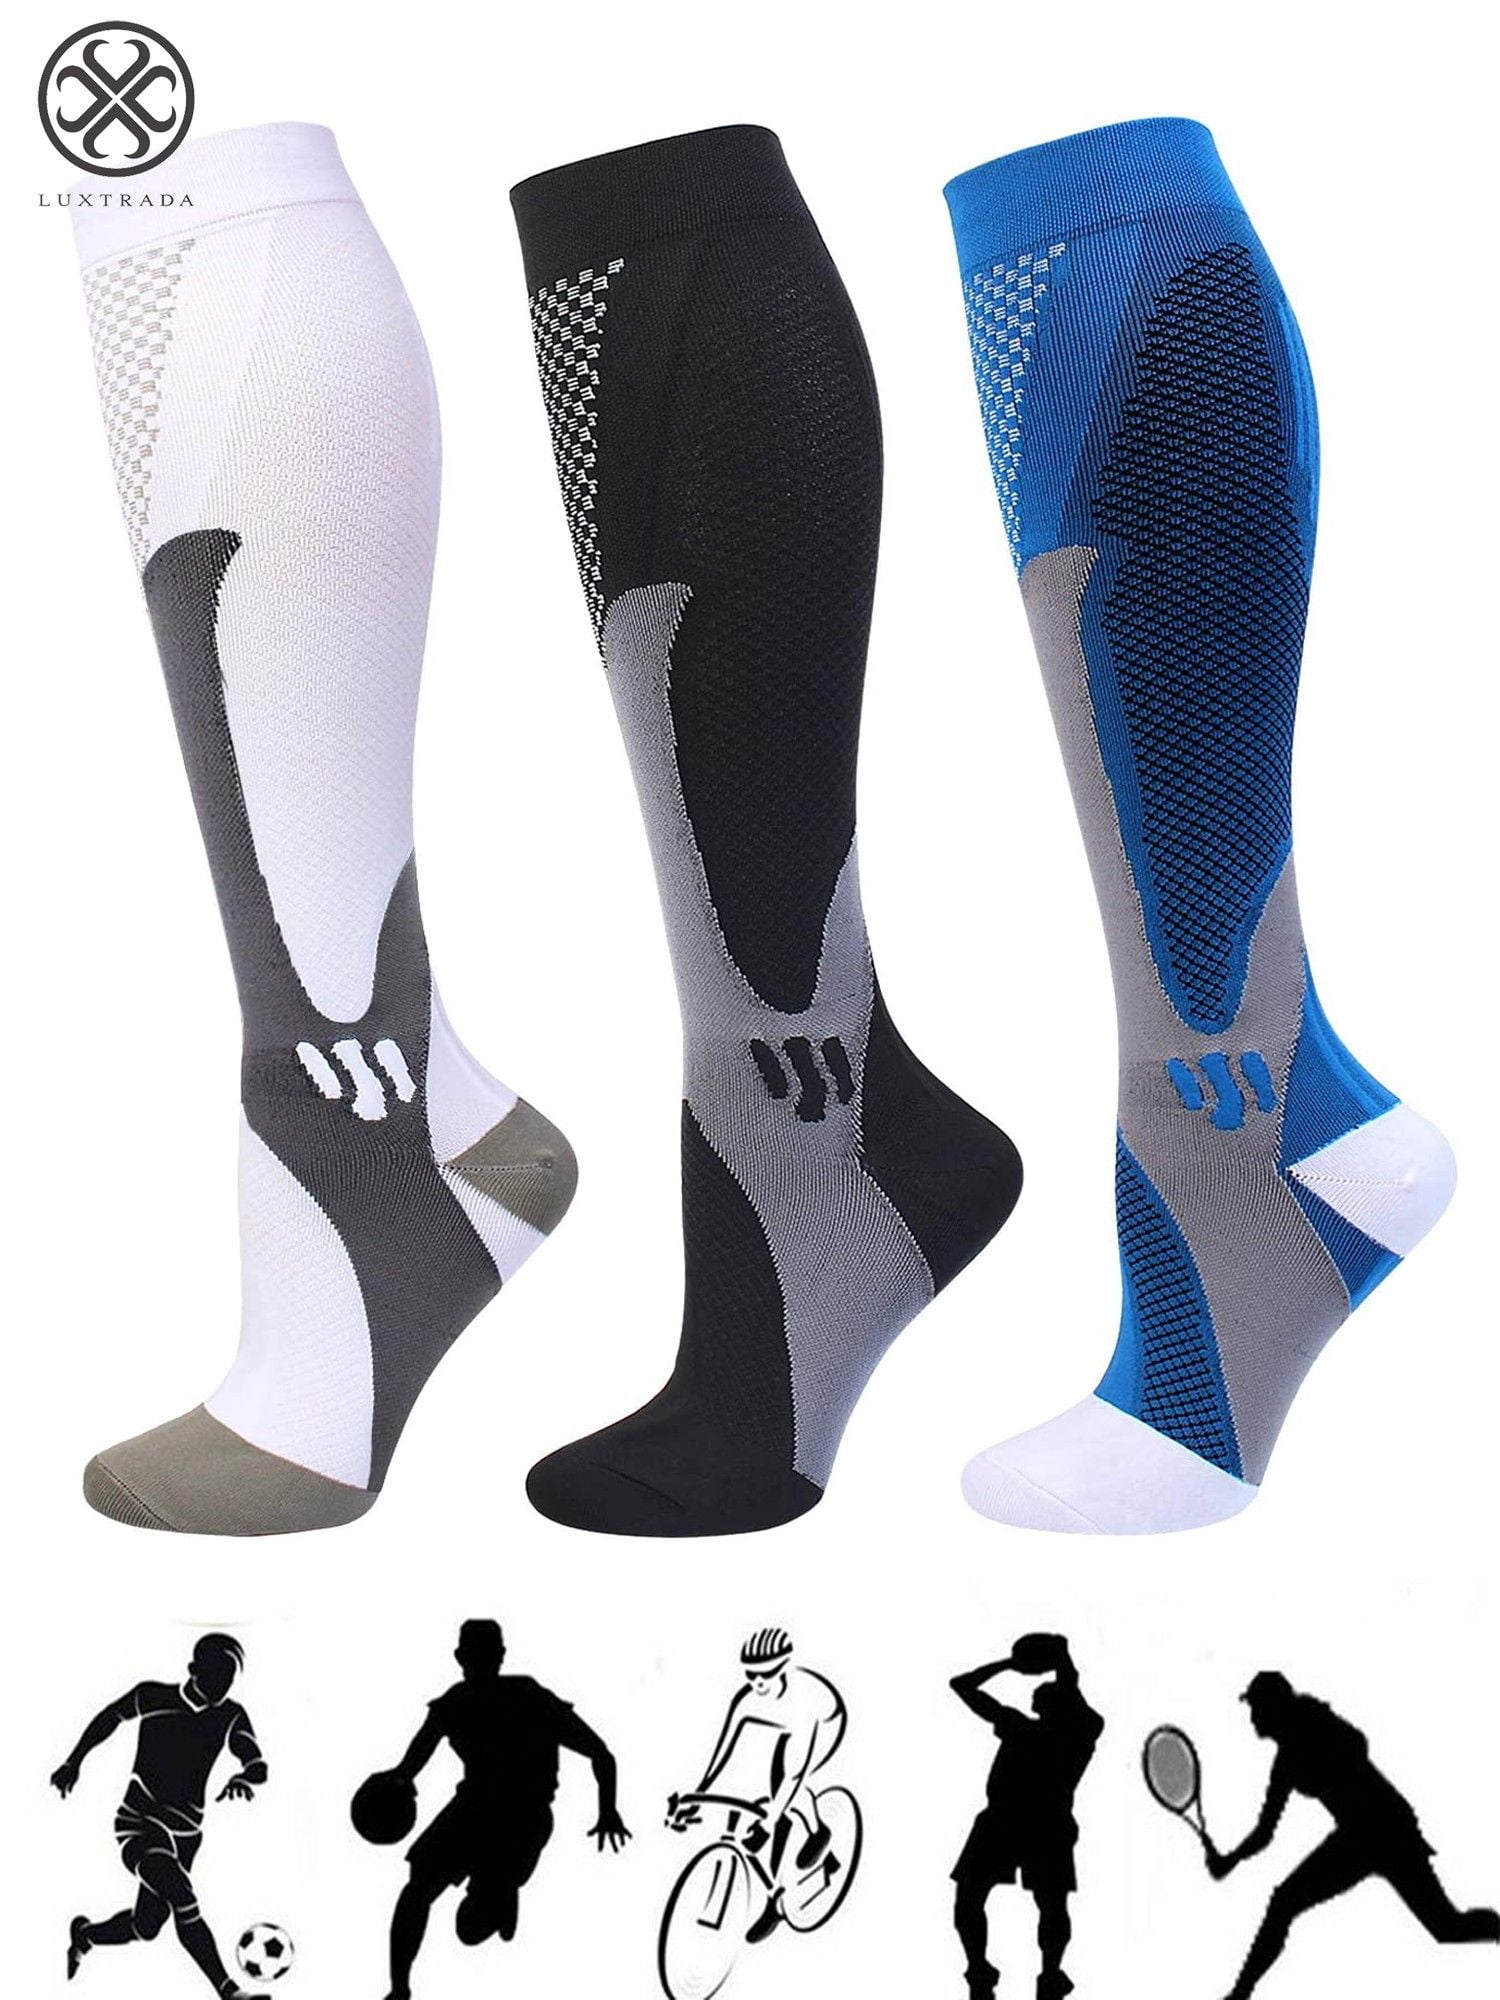 20-30mmHg Best Medical for Running Athletic Flight Travel Circulation Recovery Compression Socks For Women&Men 1/3/6 Pairs 